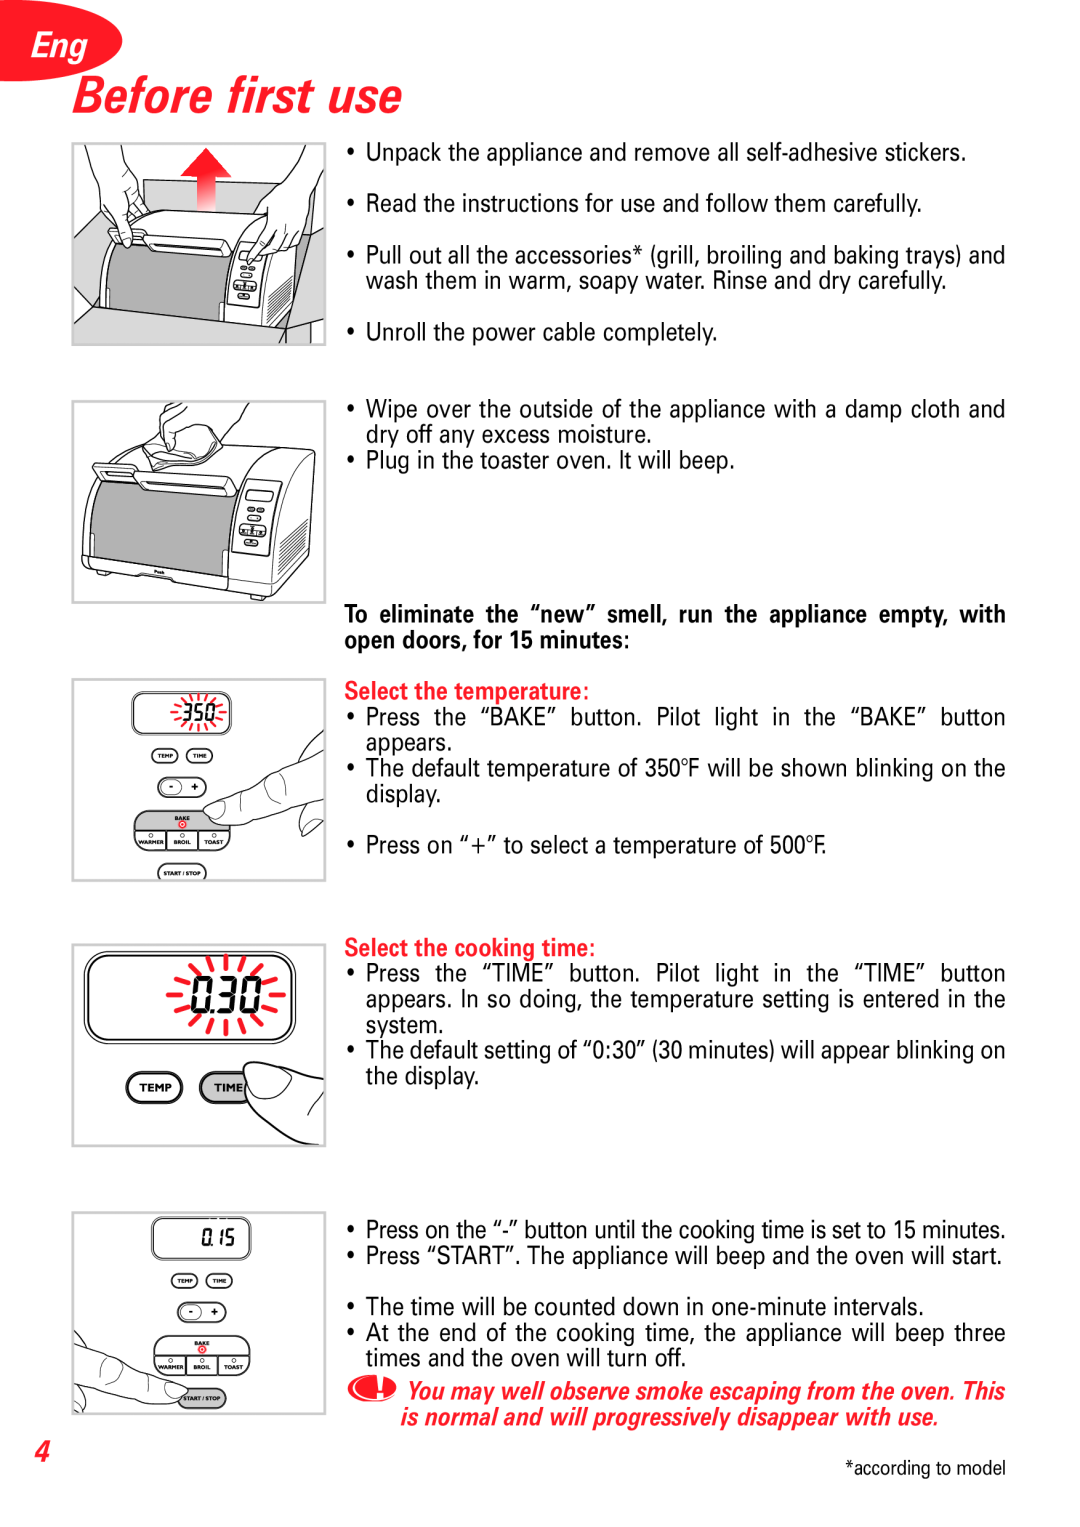 T-Fal 5252 manual Before first use, Select the temperature, Select the cooking time 